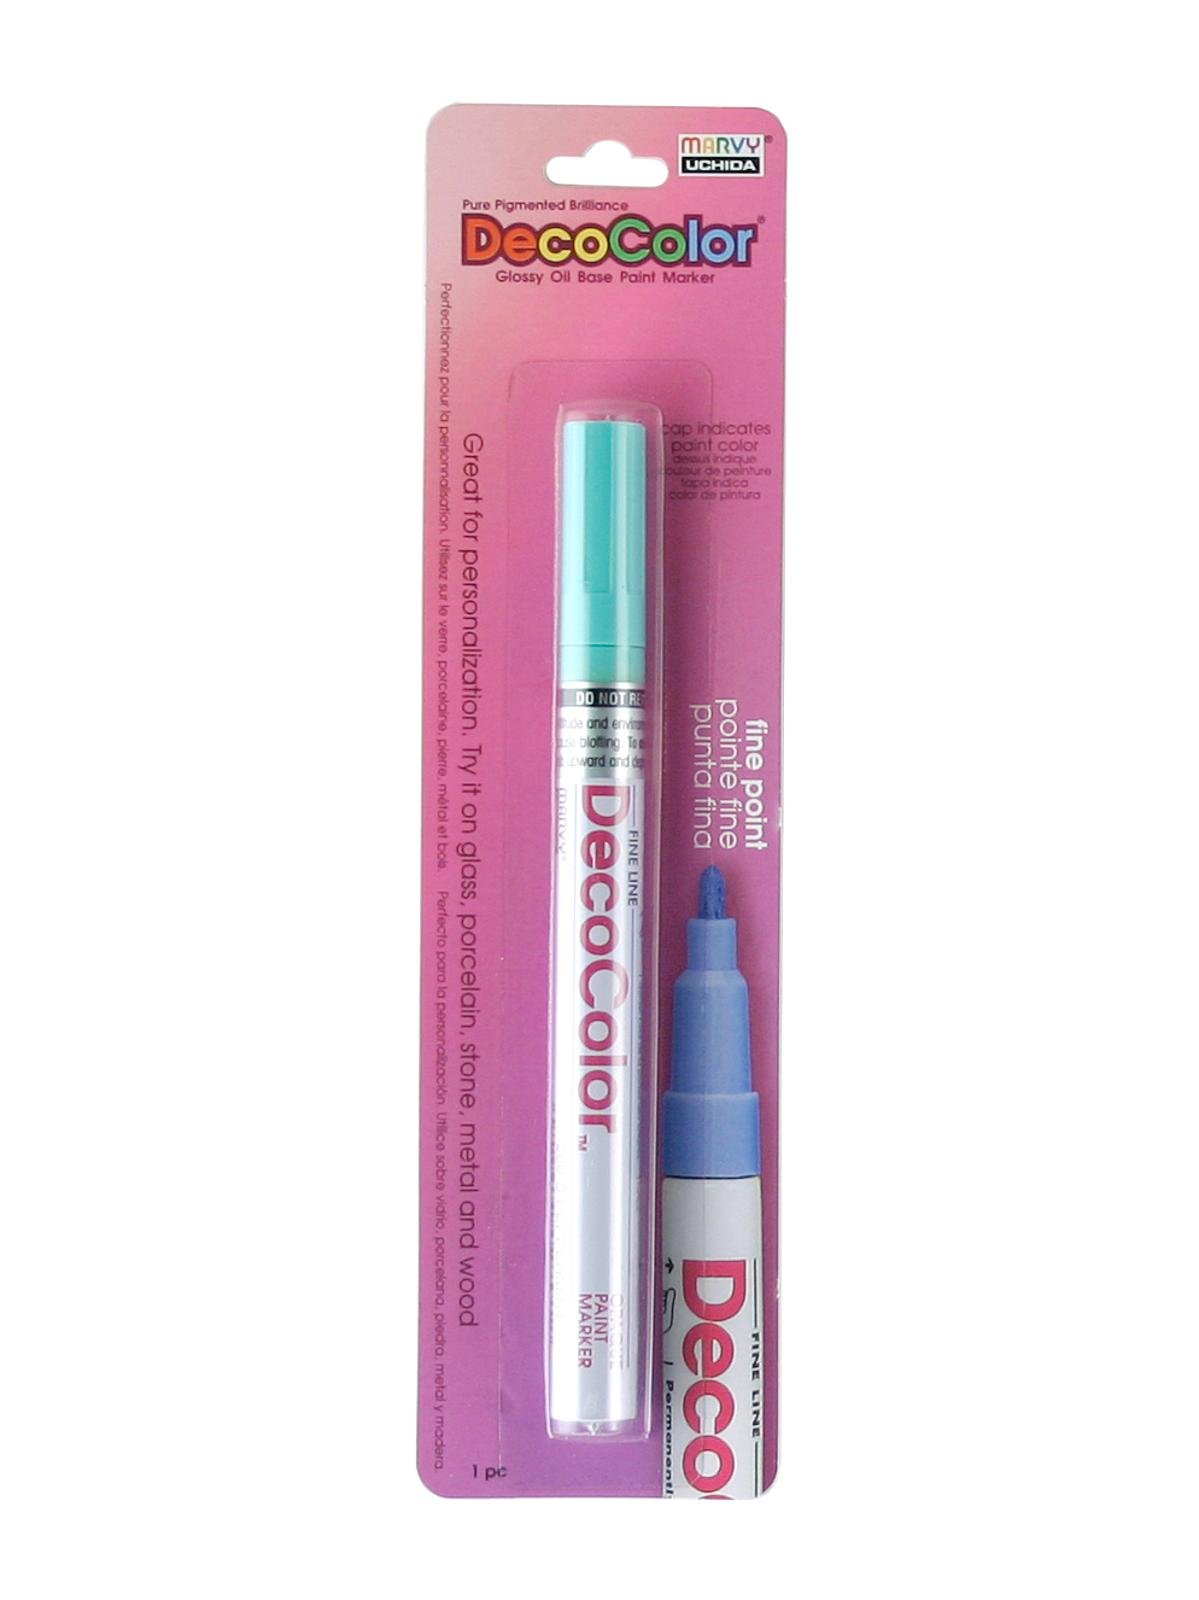 Rosewood Pack of 1 200-30 Marvy DecoColor Opaque Paint Marker Fine Tip 